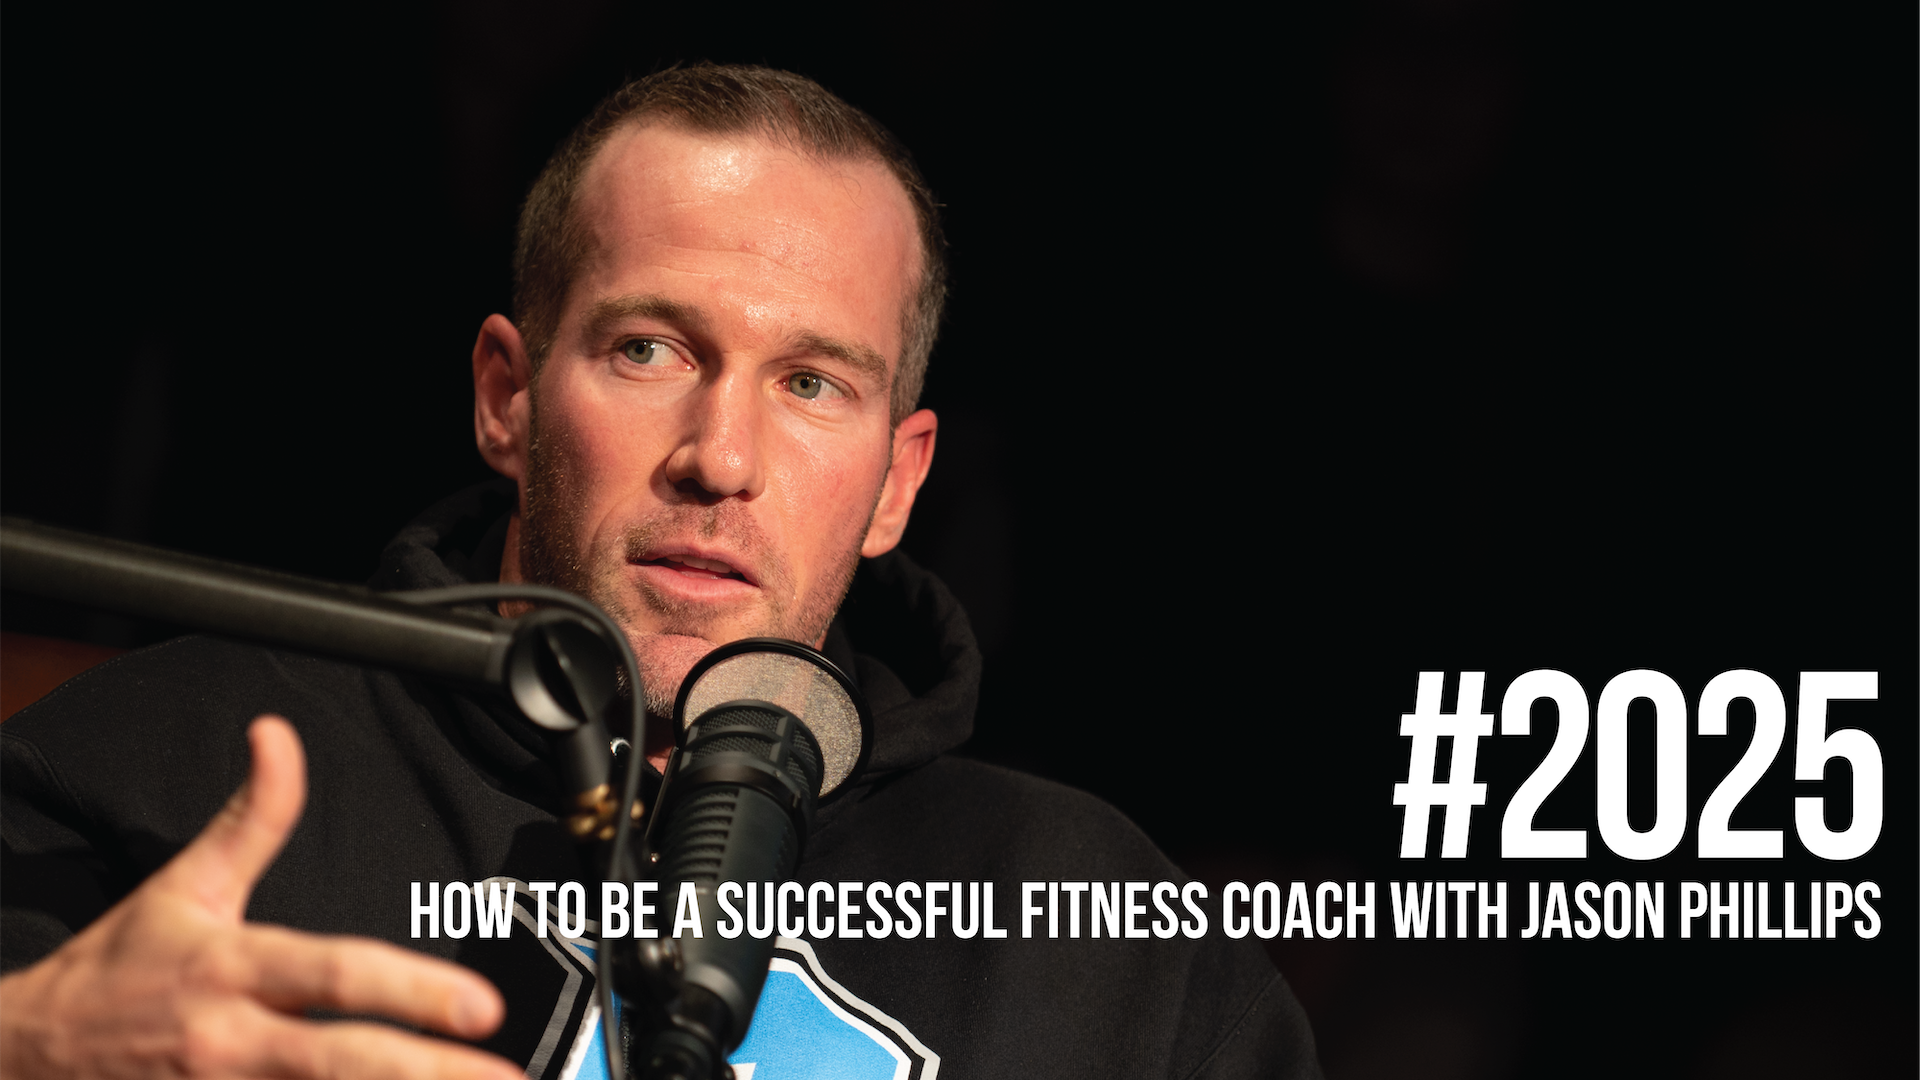 2025: How to Be a Successful Fitness Coach With Jason Phillips